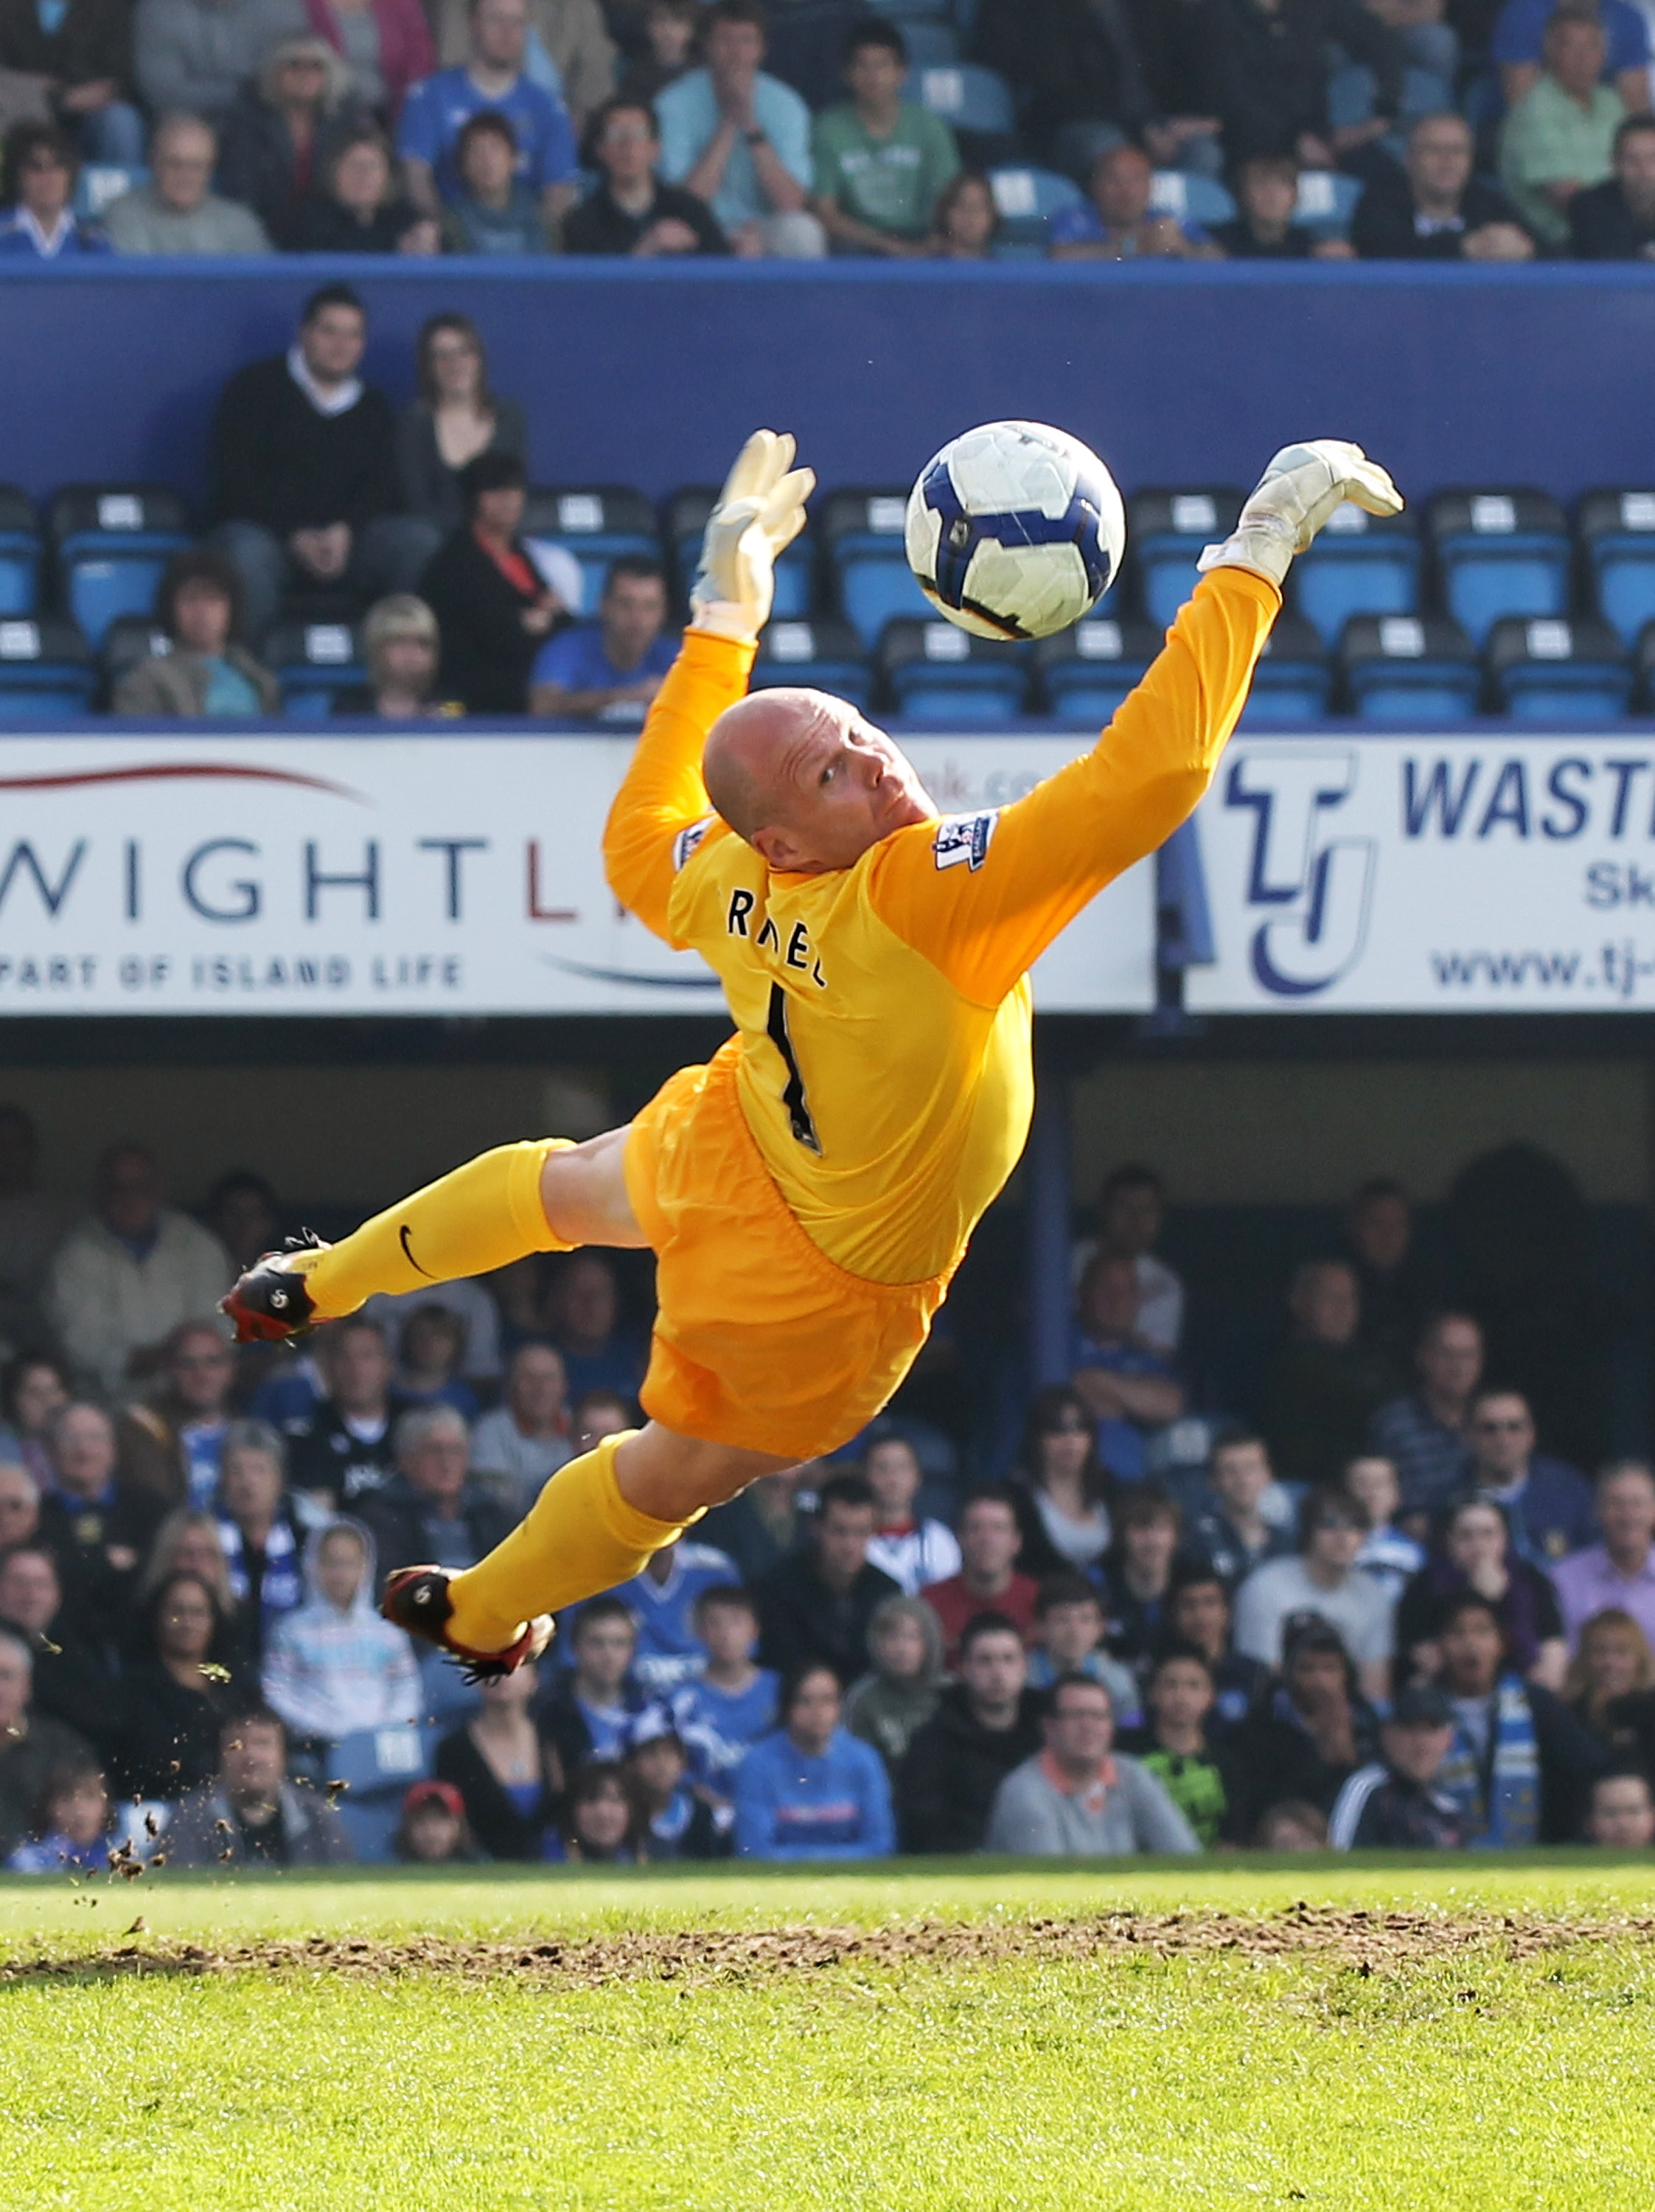 PORTSMOUTH, ENGLAND - APRIL 18: Goalkeeper Brad Friedel of Aston Villa makes a diving save during the Barclays Premier League match between Portsmouth and Aston Villa at Fratton Park on April 18, 2010 in Portsmouth, England.  (Photo by Phil Cole/Getty Ima